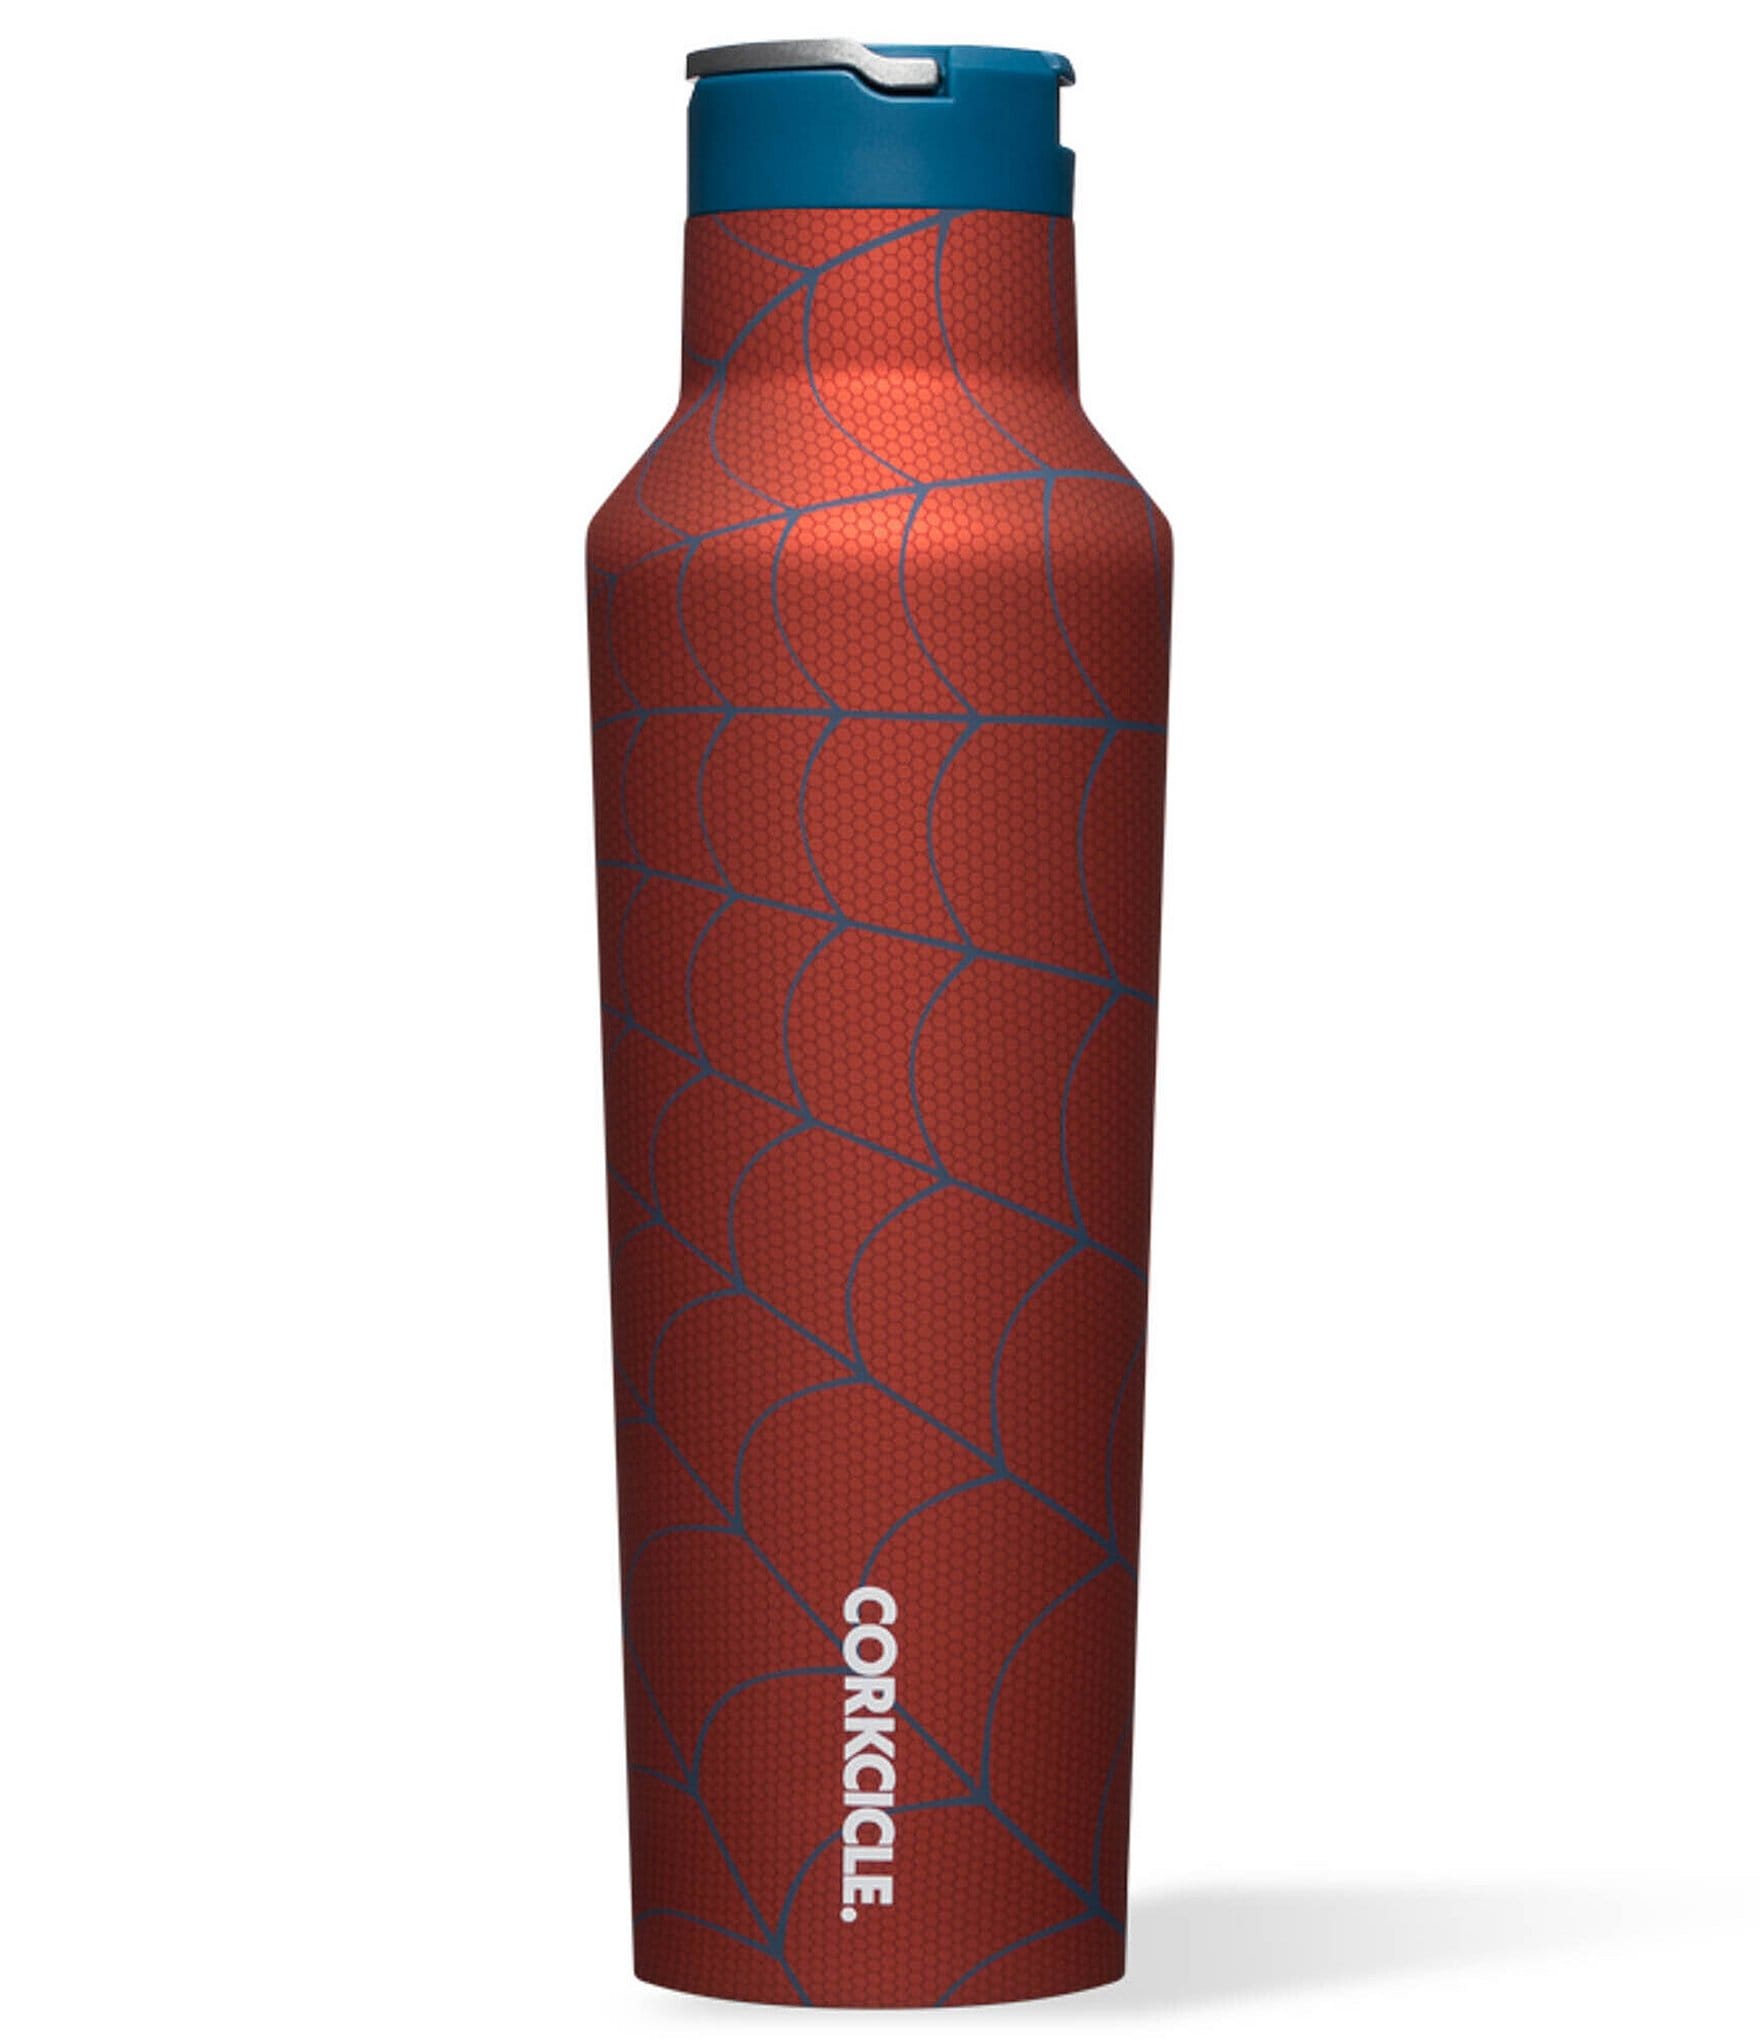 https://dimg.dillards.com/is/image/DillardsZoom/zoom/corkcicle-stainless-steel-insulated-triple-insulated-spiderman-20-oz-sport-canteen/00000000_zi_20383836.jpg